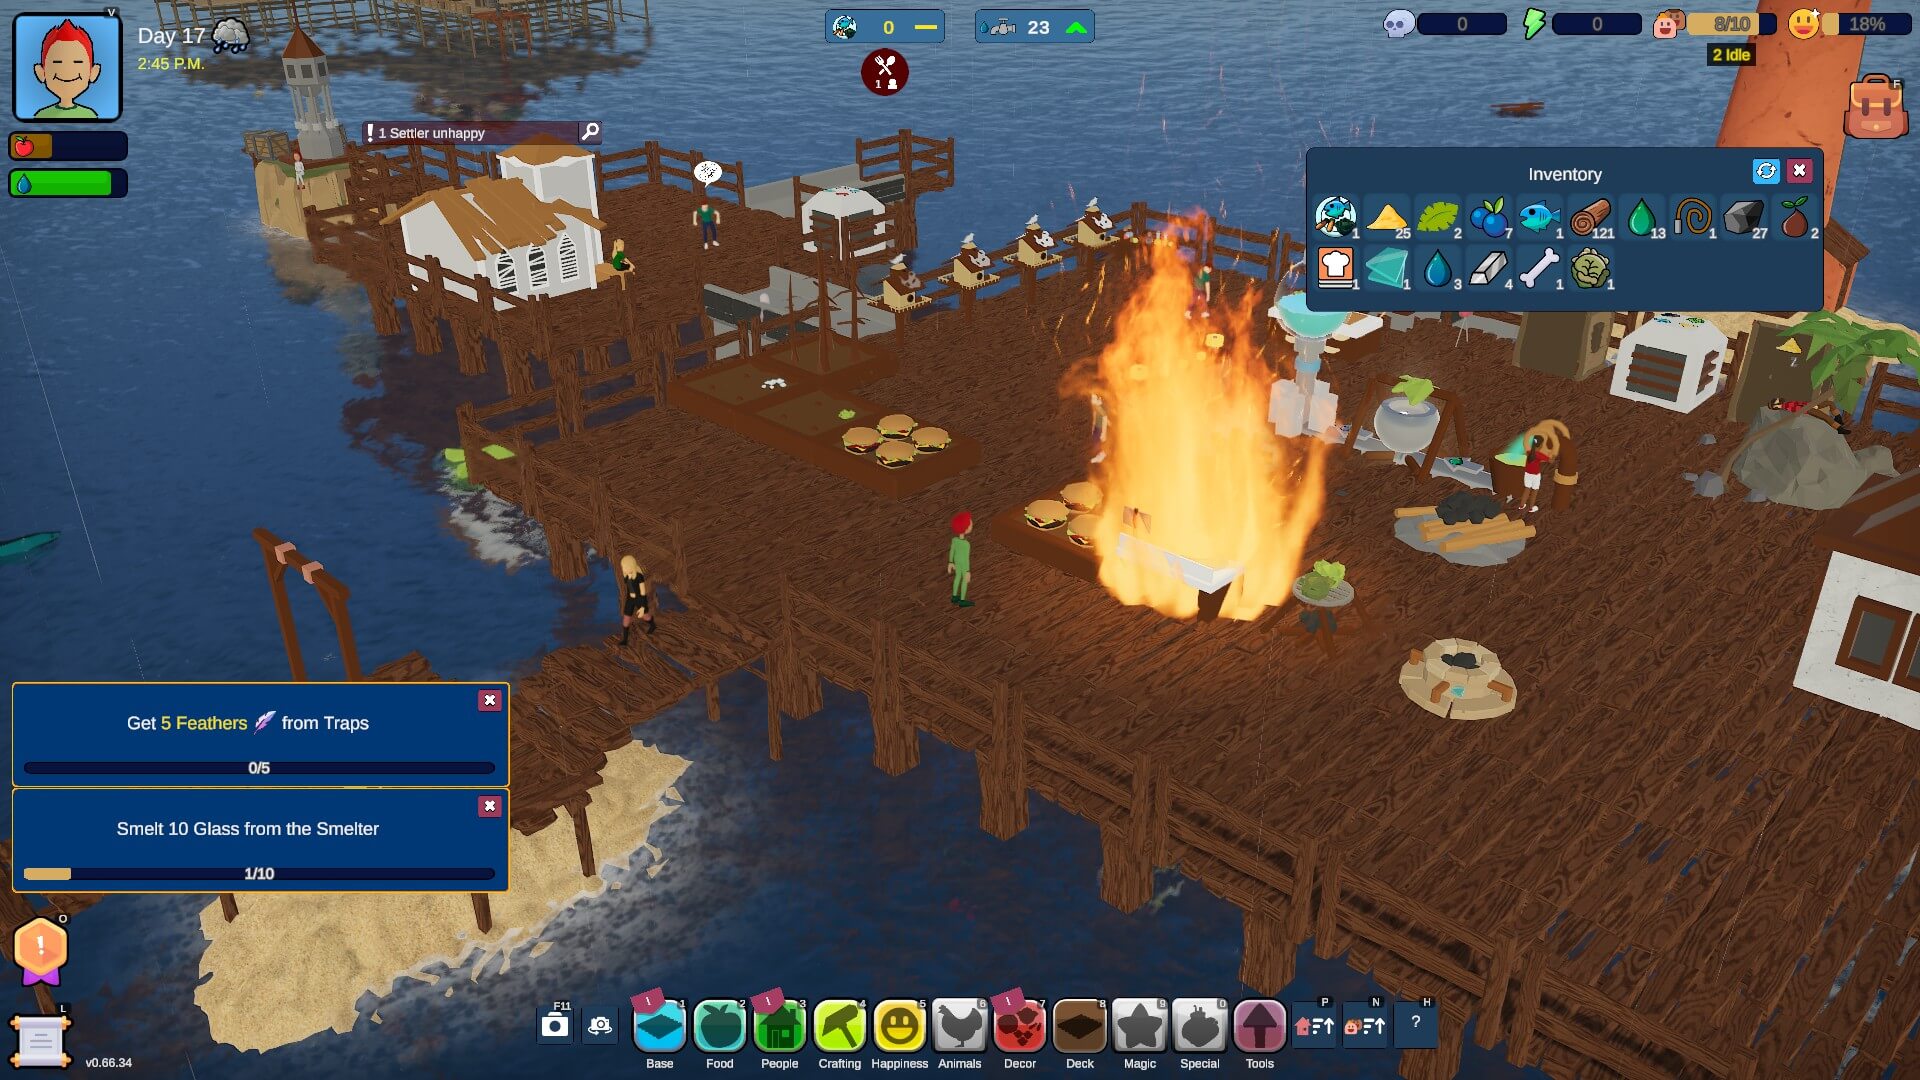 Burn baby burn, haven dock inferno. A wooden dock area is on fire. There are various other items on the dock, but mainly it's the fire that seems to be the focal point. Should put it out really. 